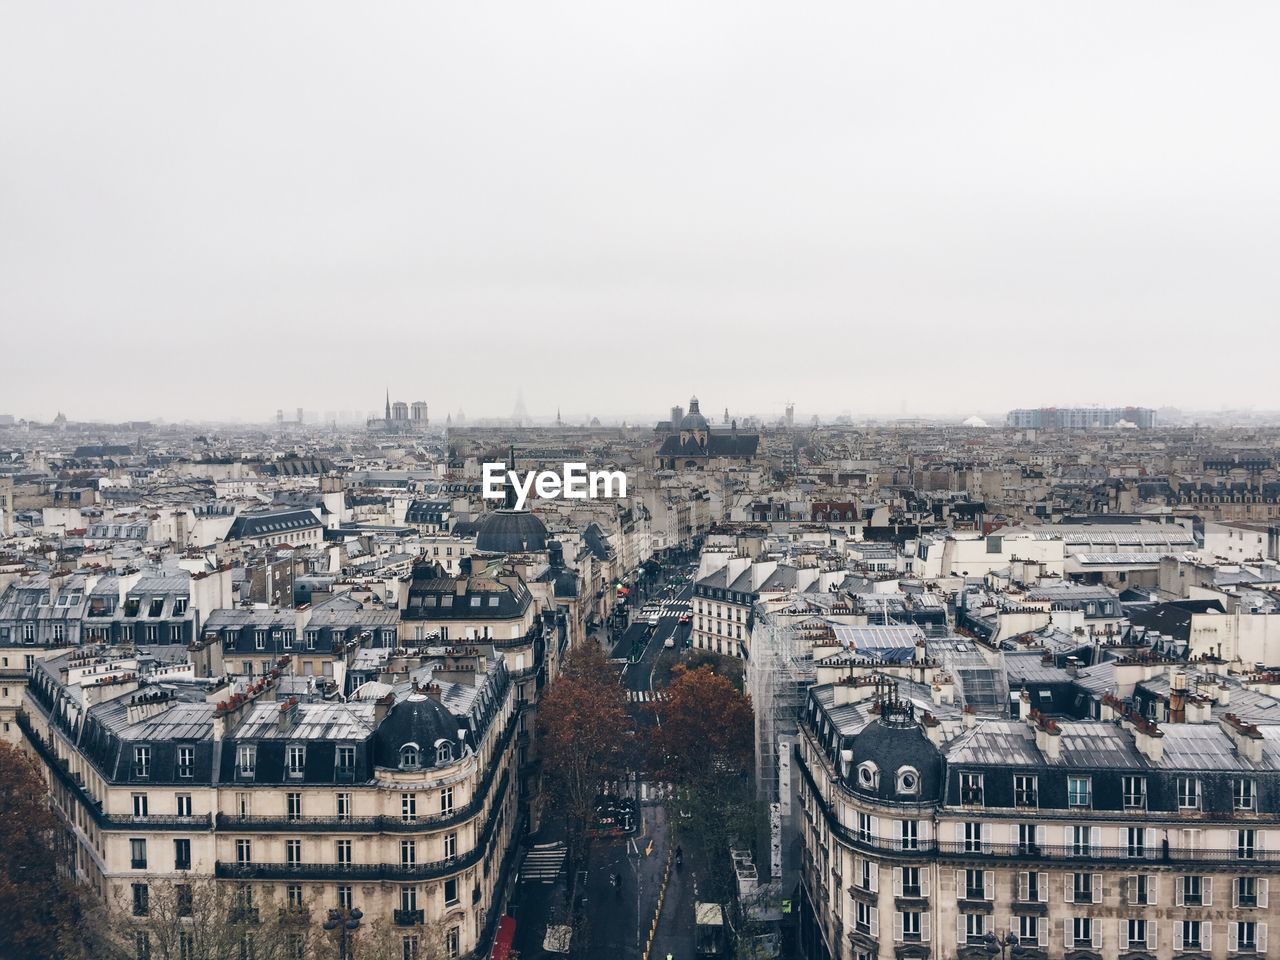 Aerial view of paris roofs and perspective, wintertime, streets and rooftops 